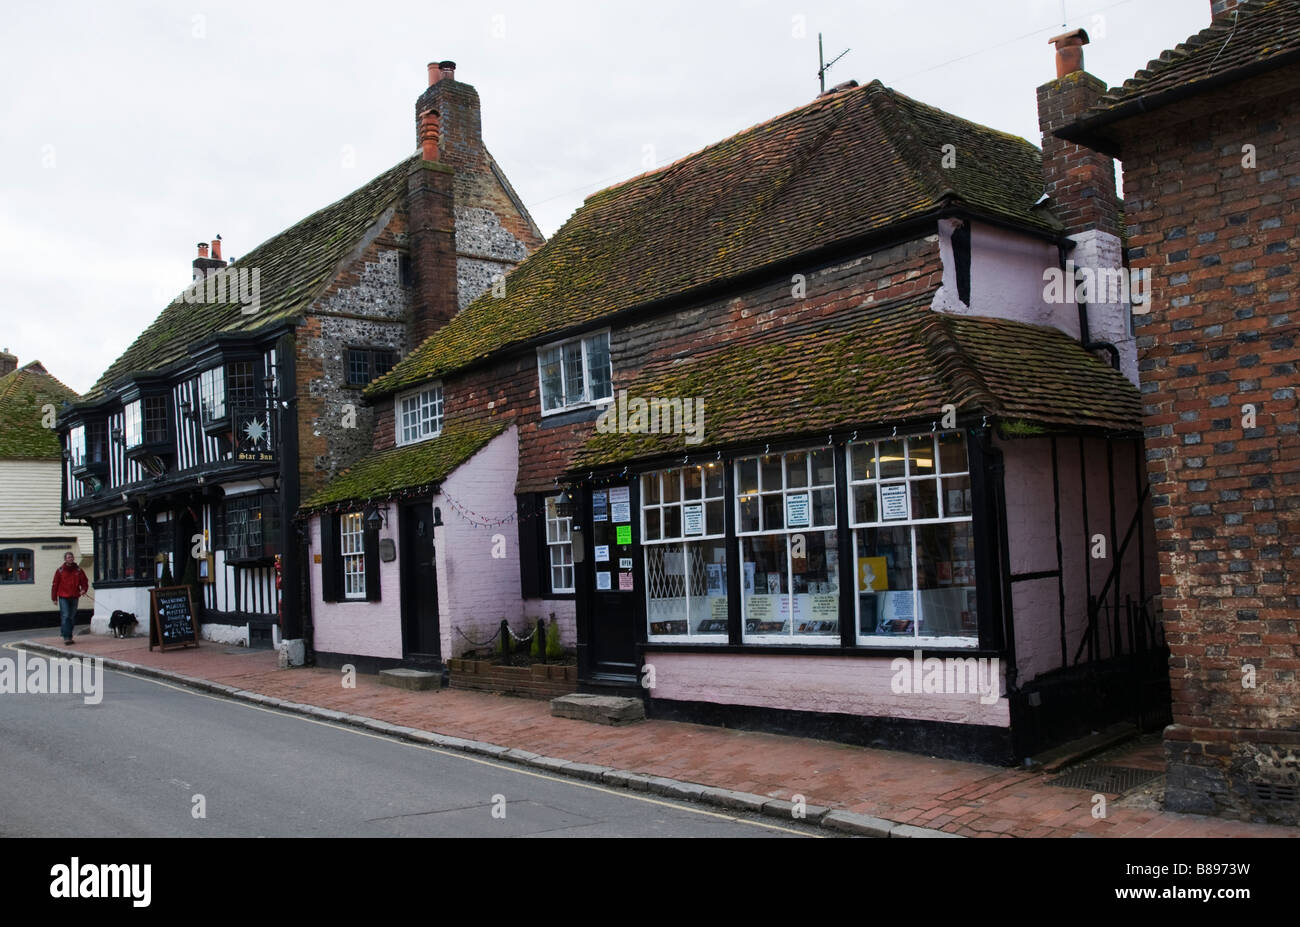 UNITED KINGDOM, ENGLAND, 14th February 2009. The village of Alfriston in East Sussex. Stock Photo